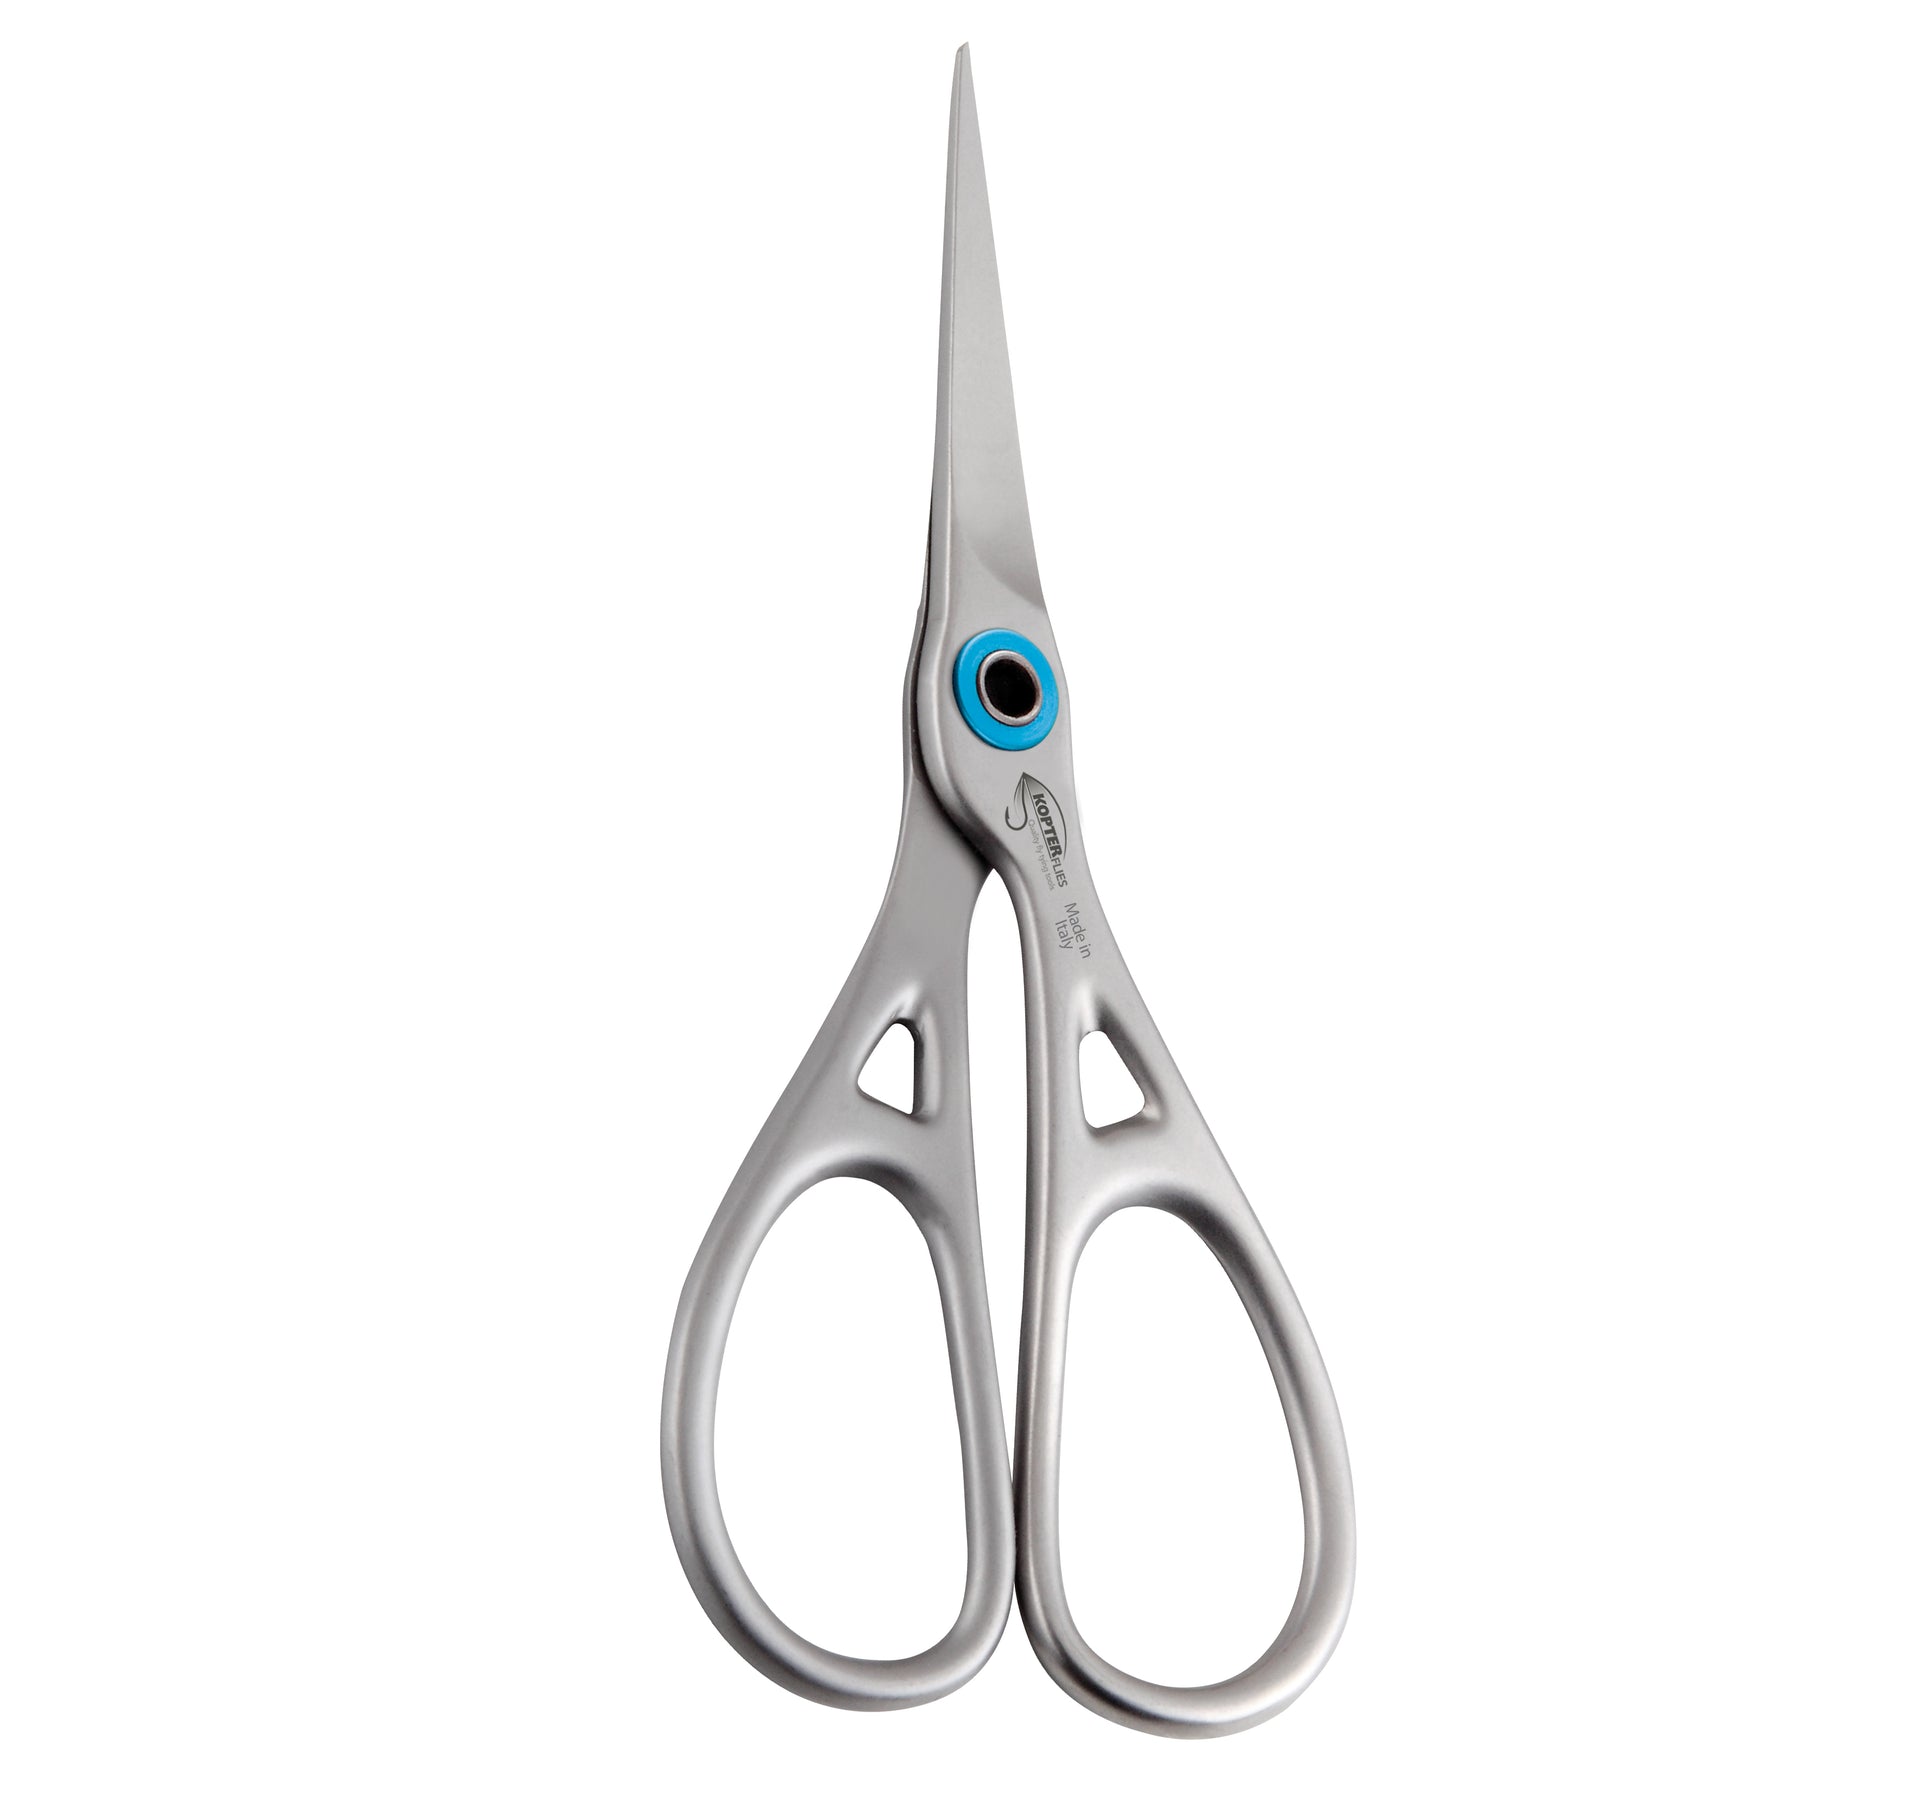 fly scissors fishing, fly scissors fishing Suppliers and Manufacturers at